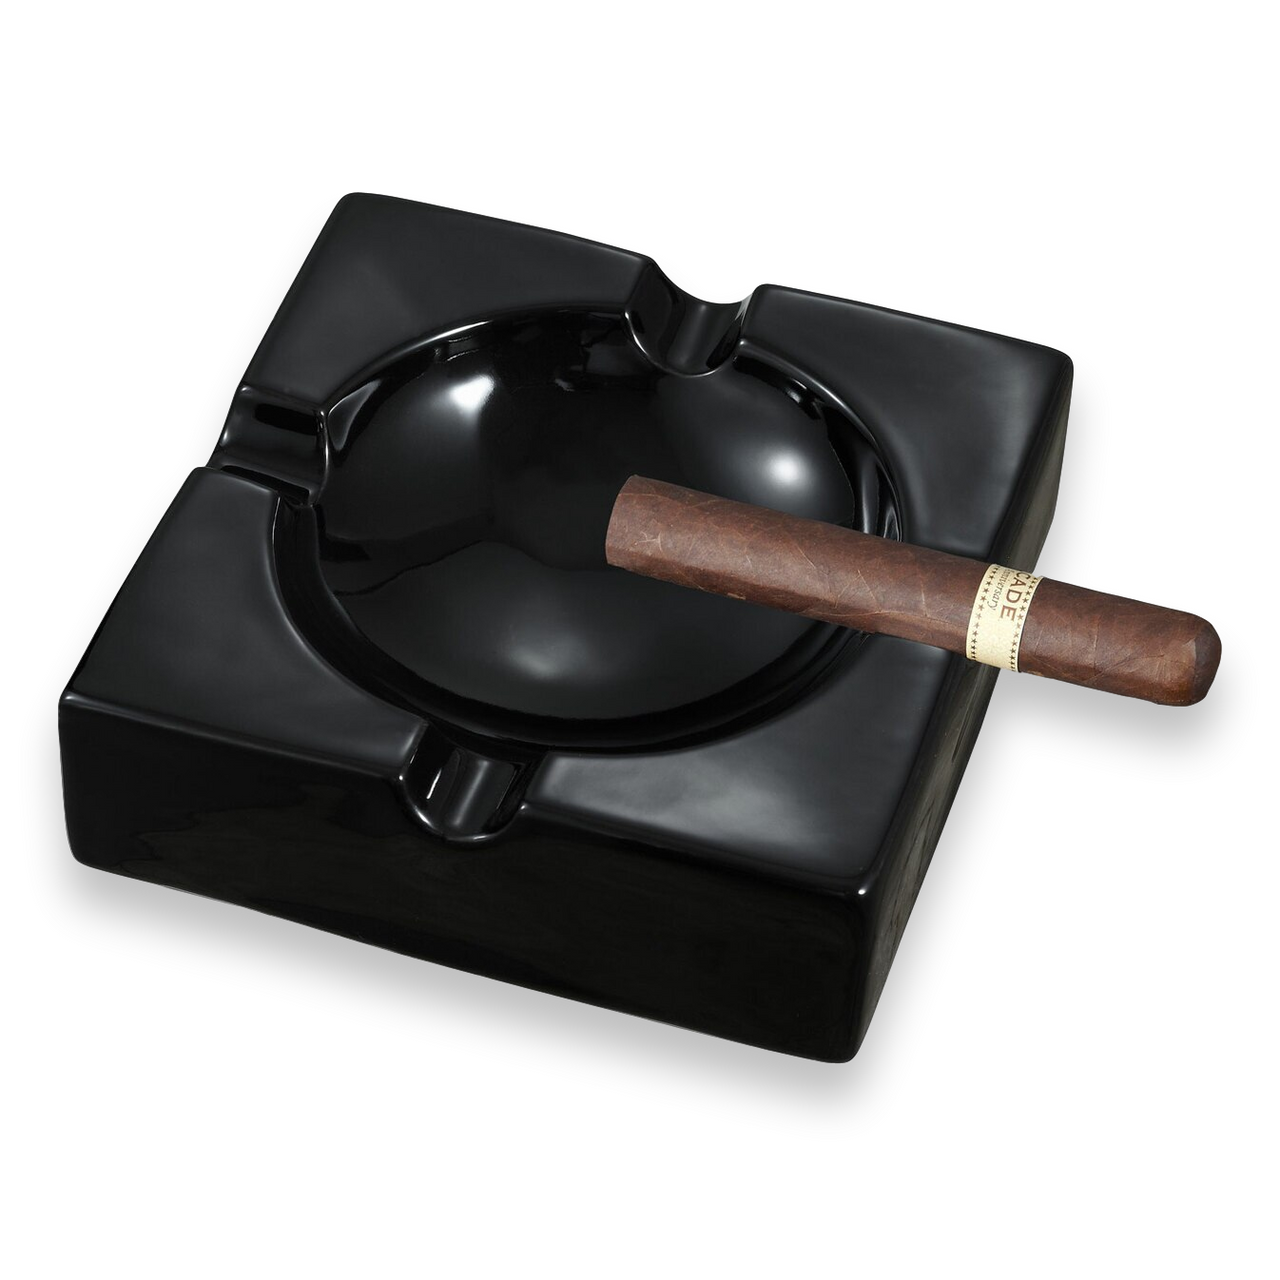 https://cdn11.bigcommerce.com/s-c63ufk/images/stencil/1280x1280/products/1537/7743/Visol-Lokken-Ceramic-4-Cigar-Ashtray-Black-VASH716BK-Exterior-Front-with-Cigar-1_clipped_rev_1__73504.1616293198.png?c=2?imbypass=on